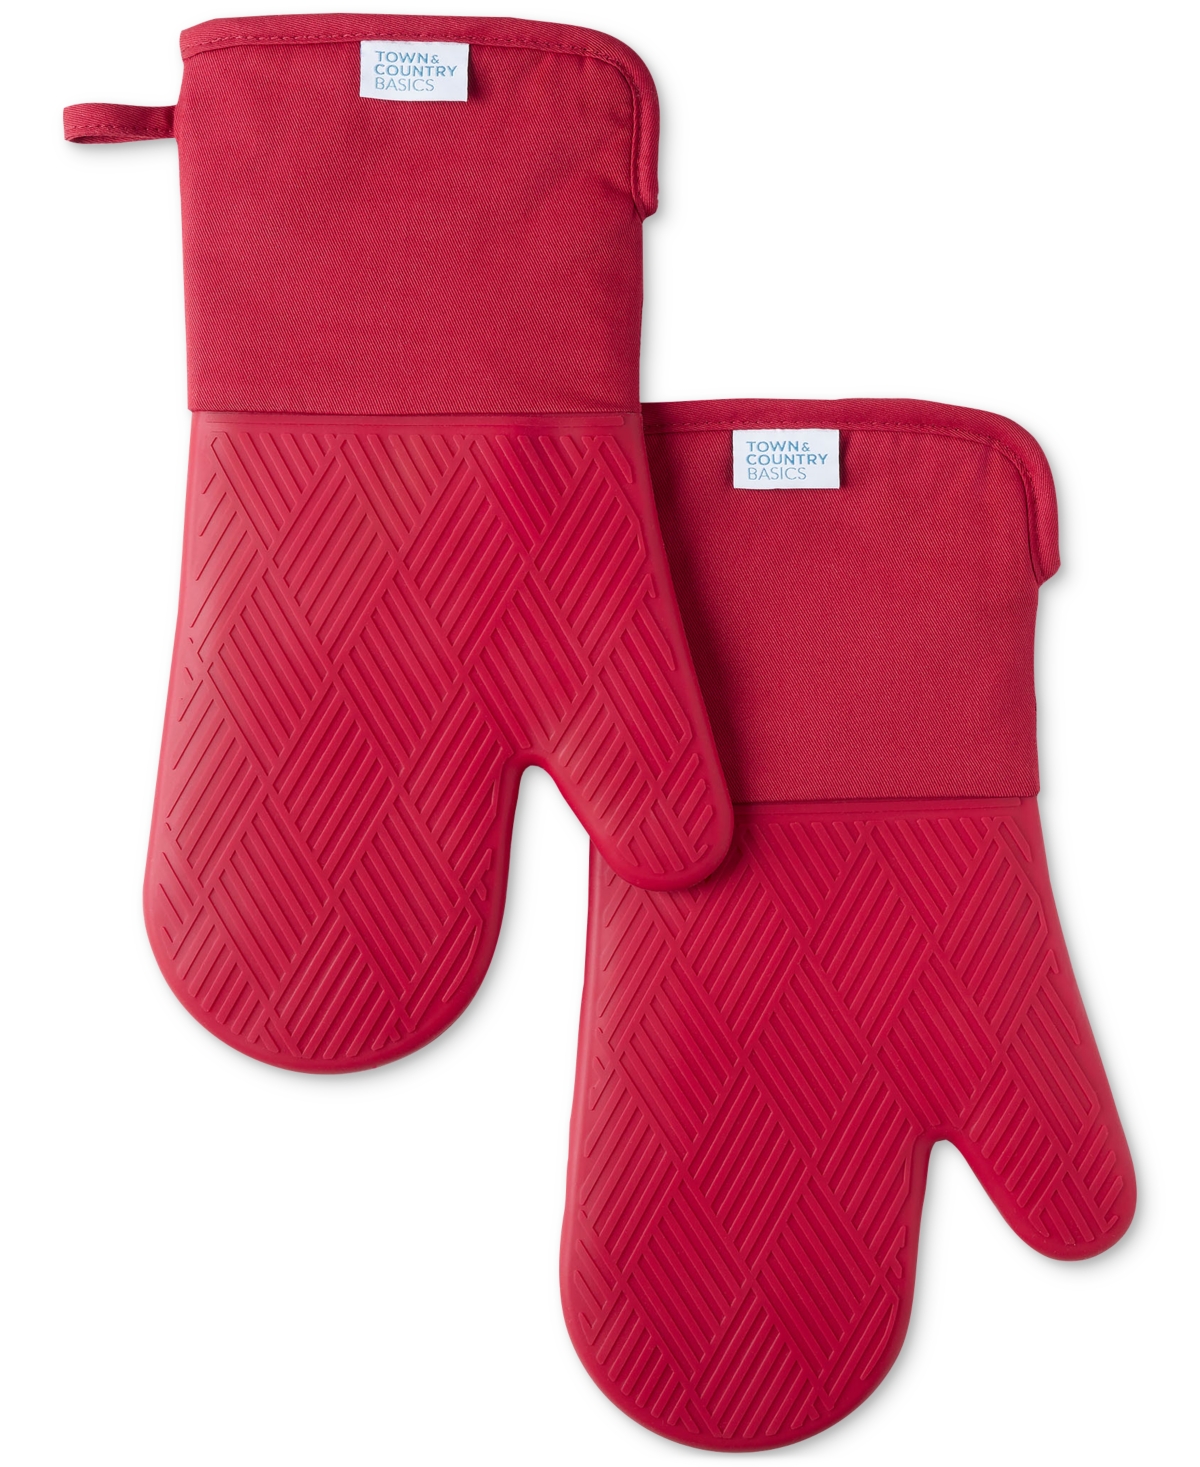 Town & Country Living Basics Silicone Basketweave Oven Mitts, Set Of 2 In Red